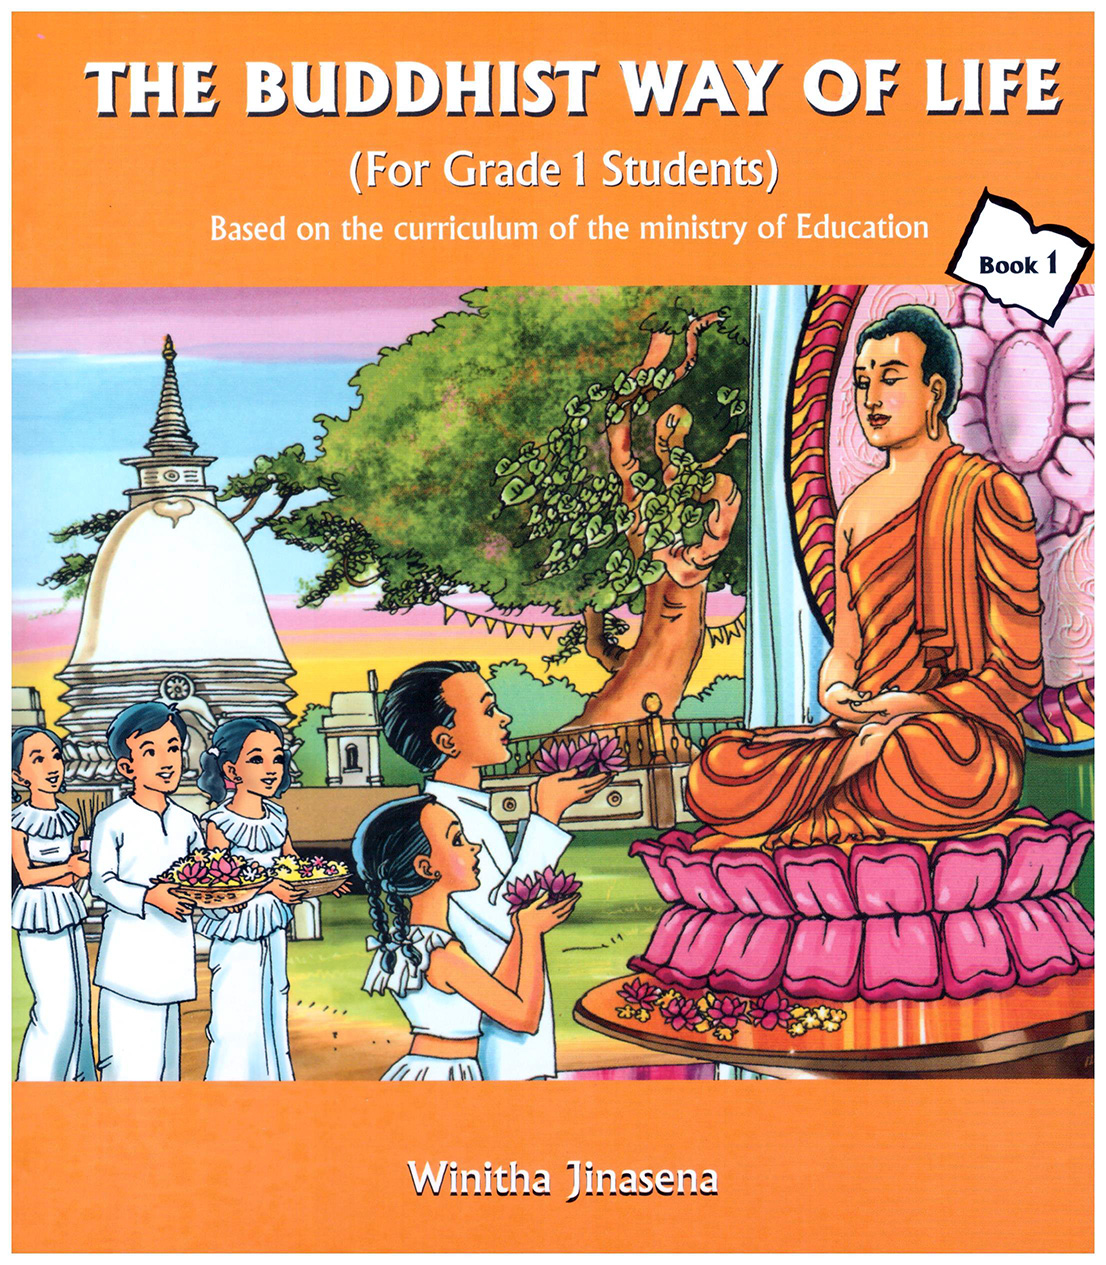 The Buddhist Way of Life Book 1